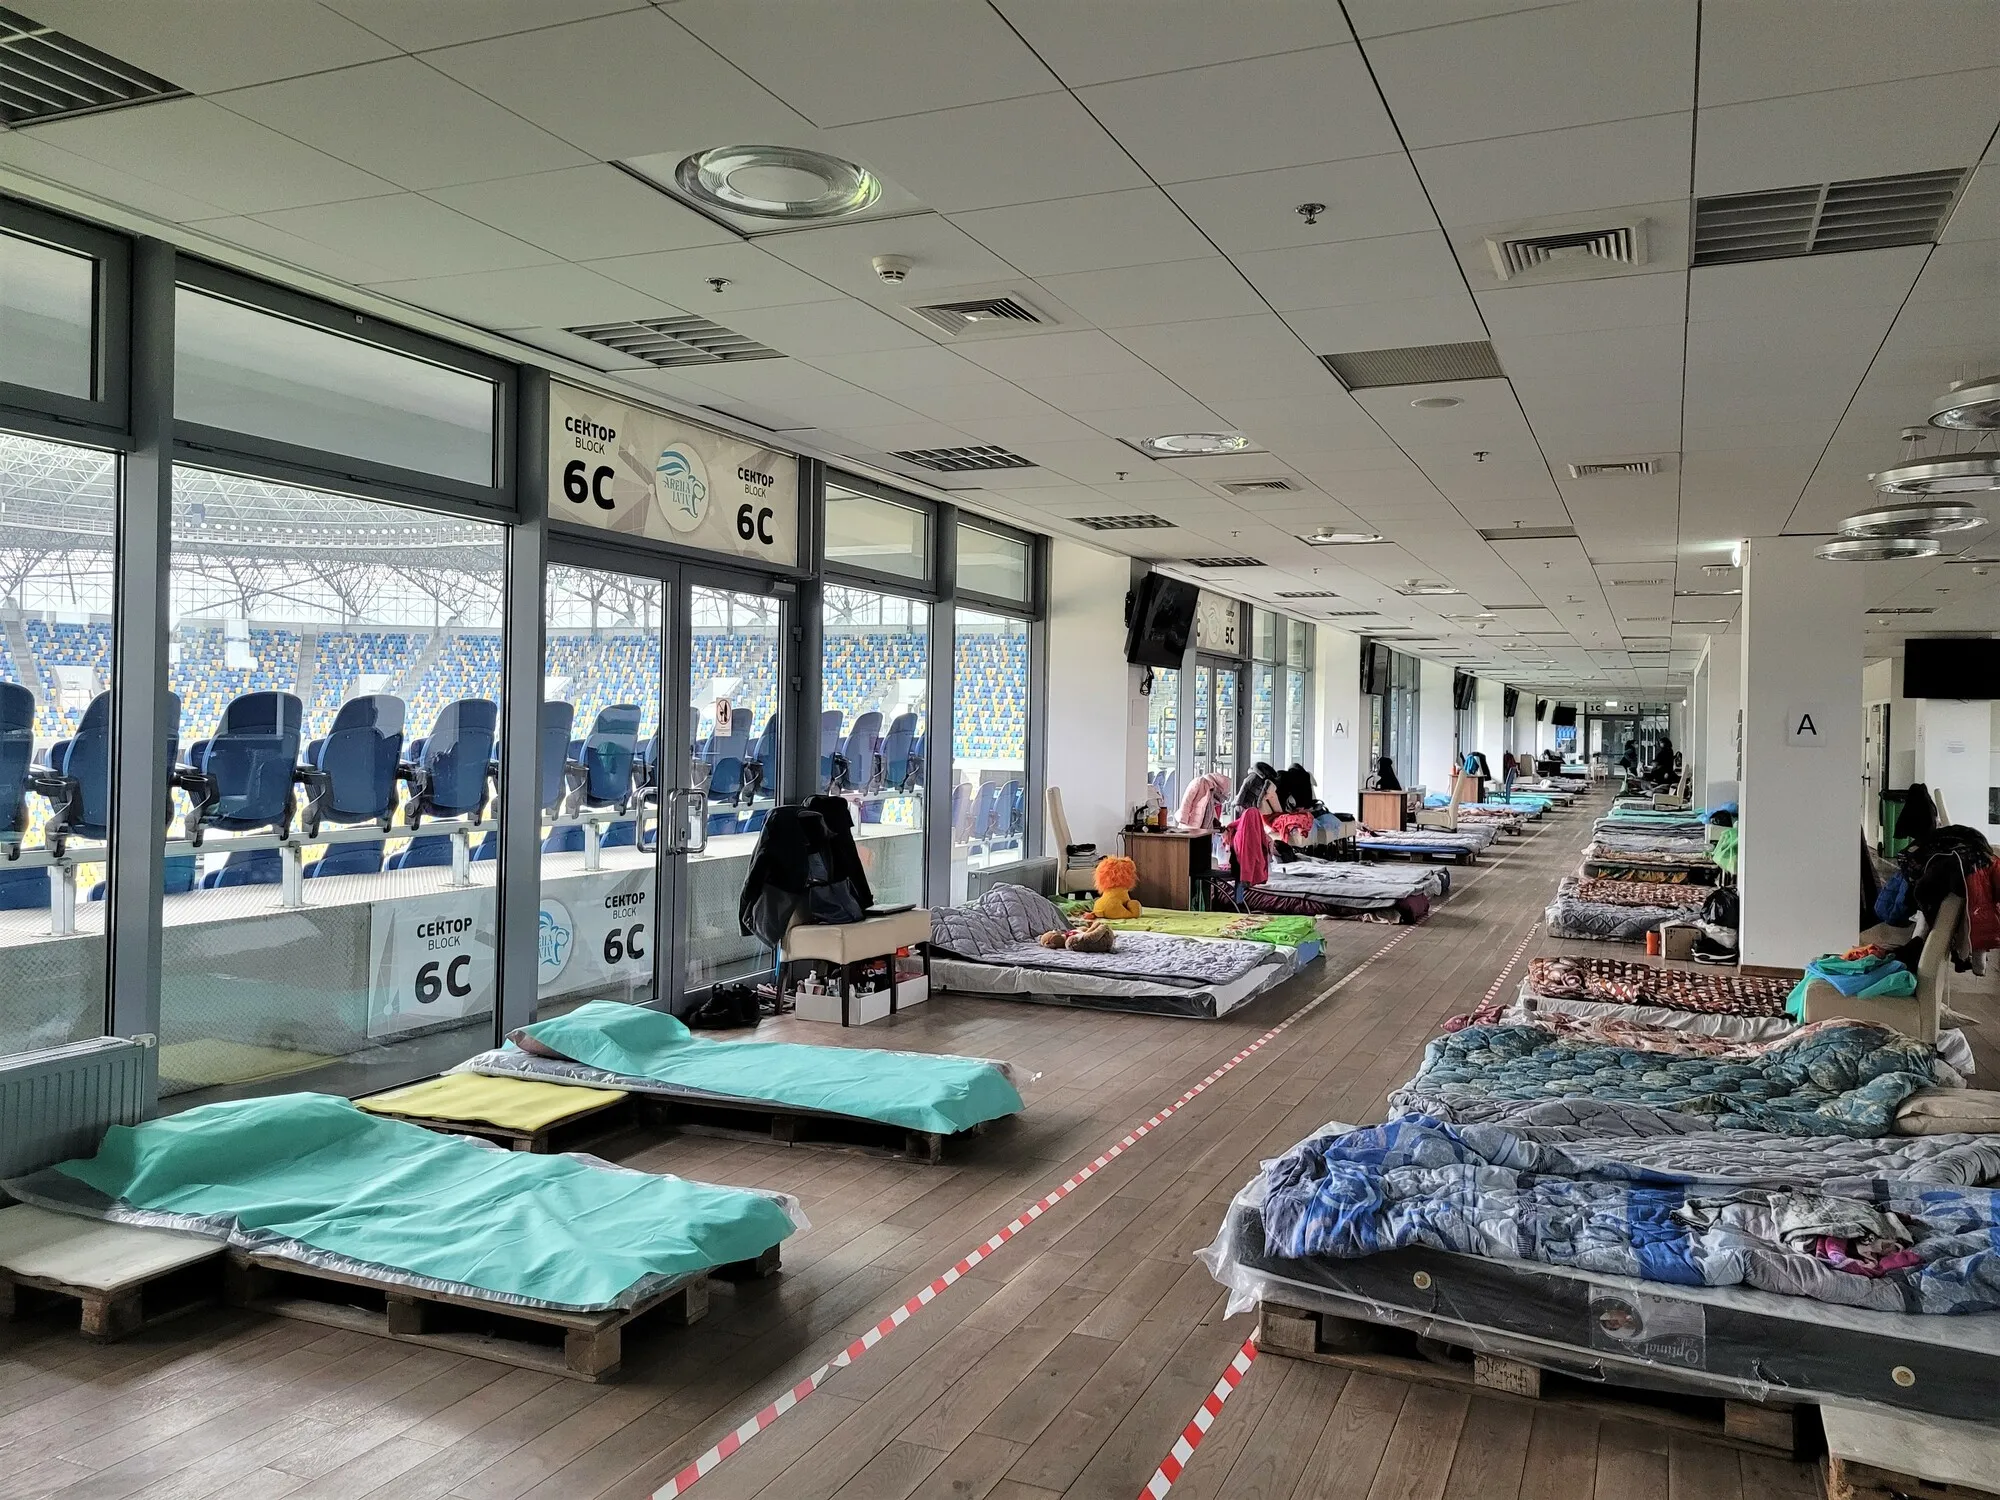 Temporary beds inside a football stadium indoor concourse.